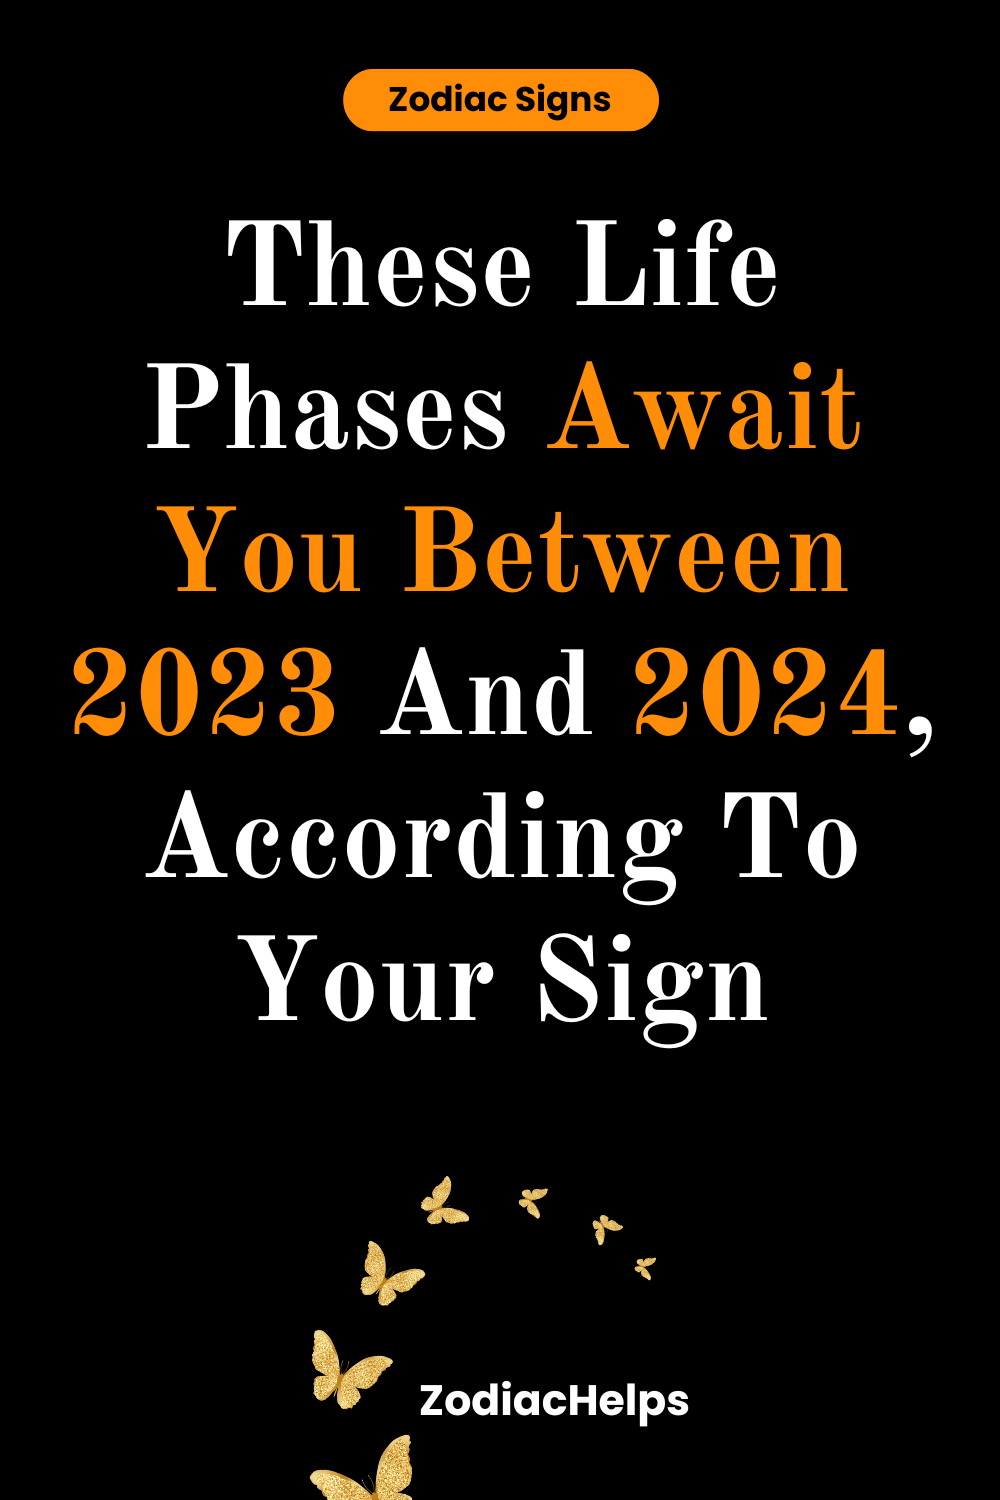 These Life Phases Await You Between 2023 And 2024, According To Your Sign